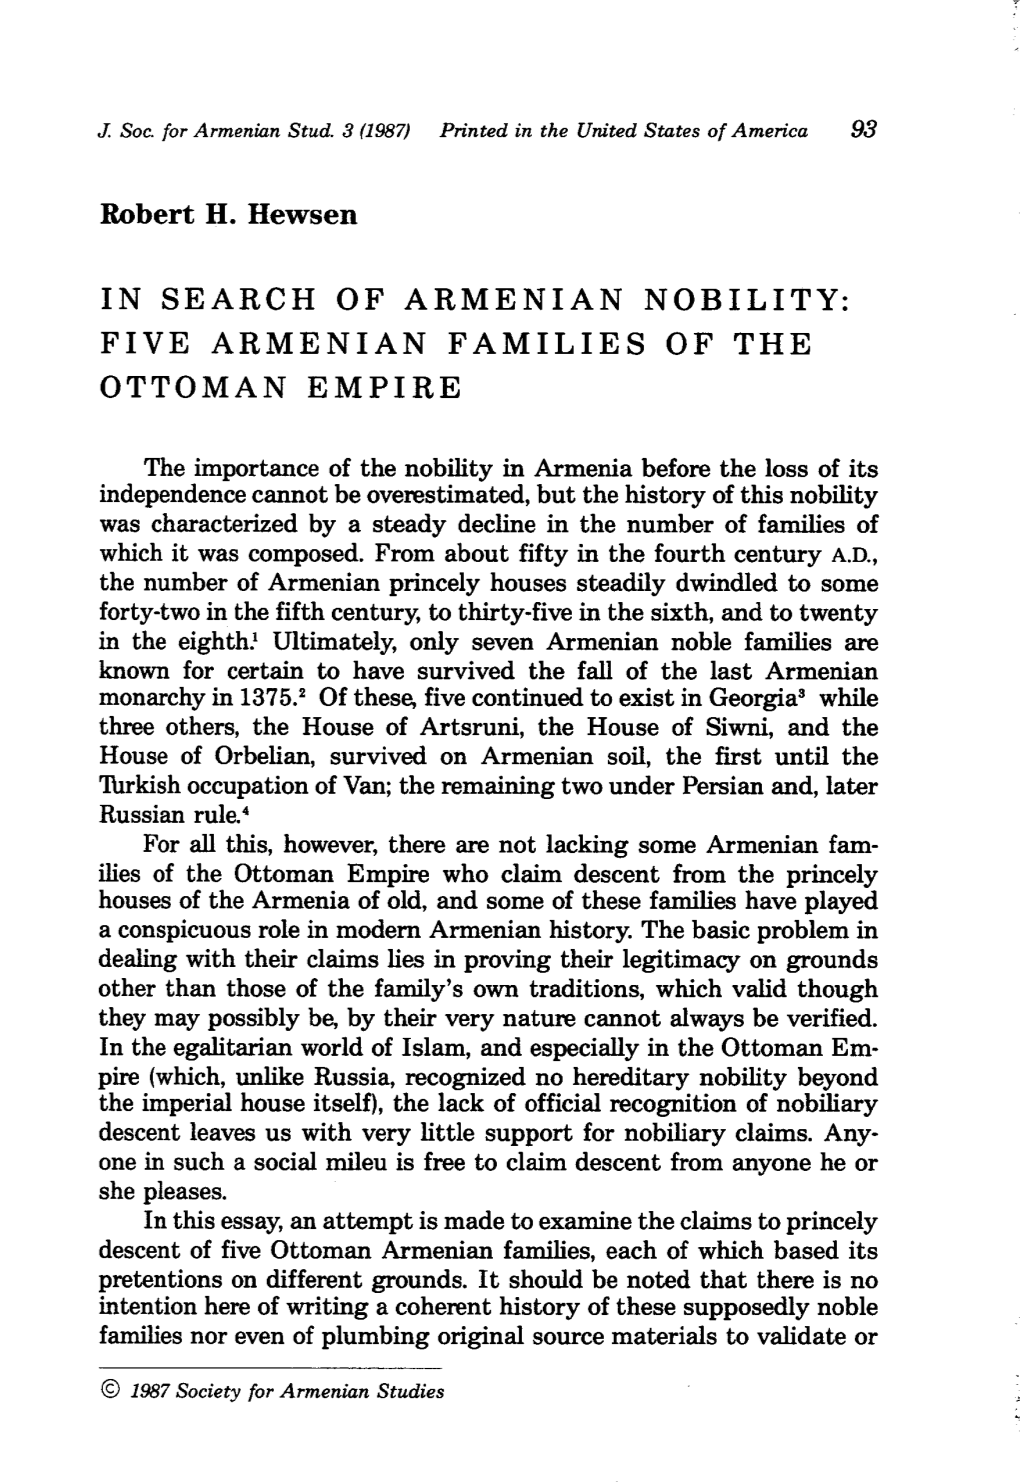 In Search of Armenian Nobility: Five Armenian Families of the Ottoman Empire